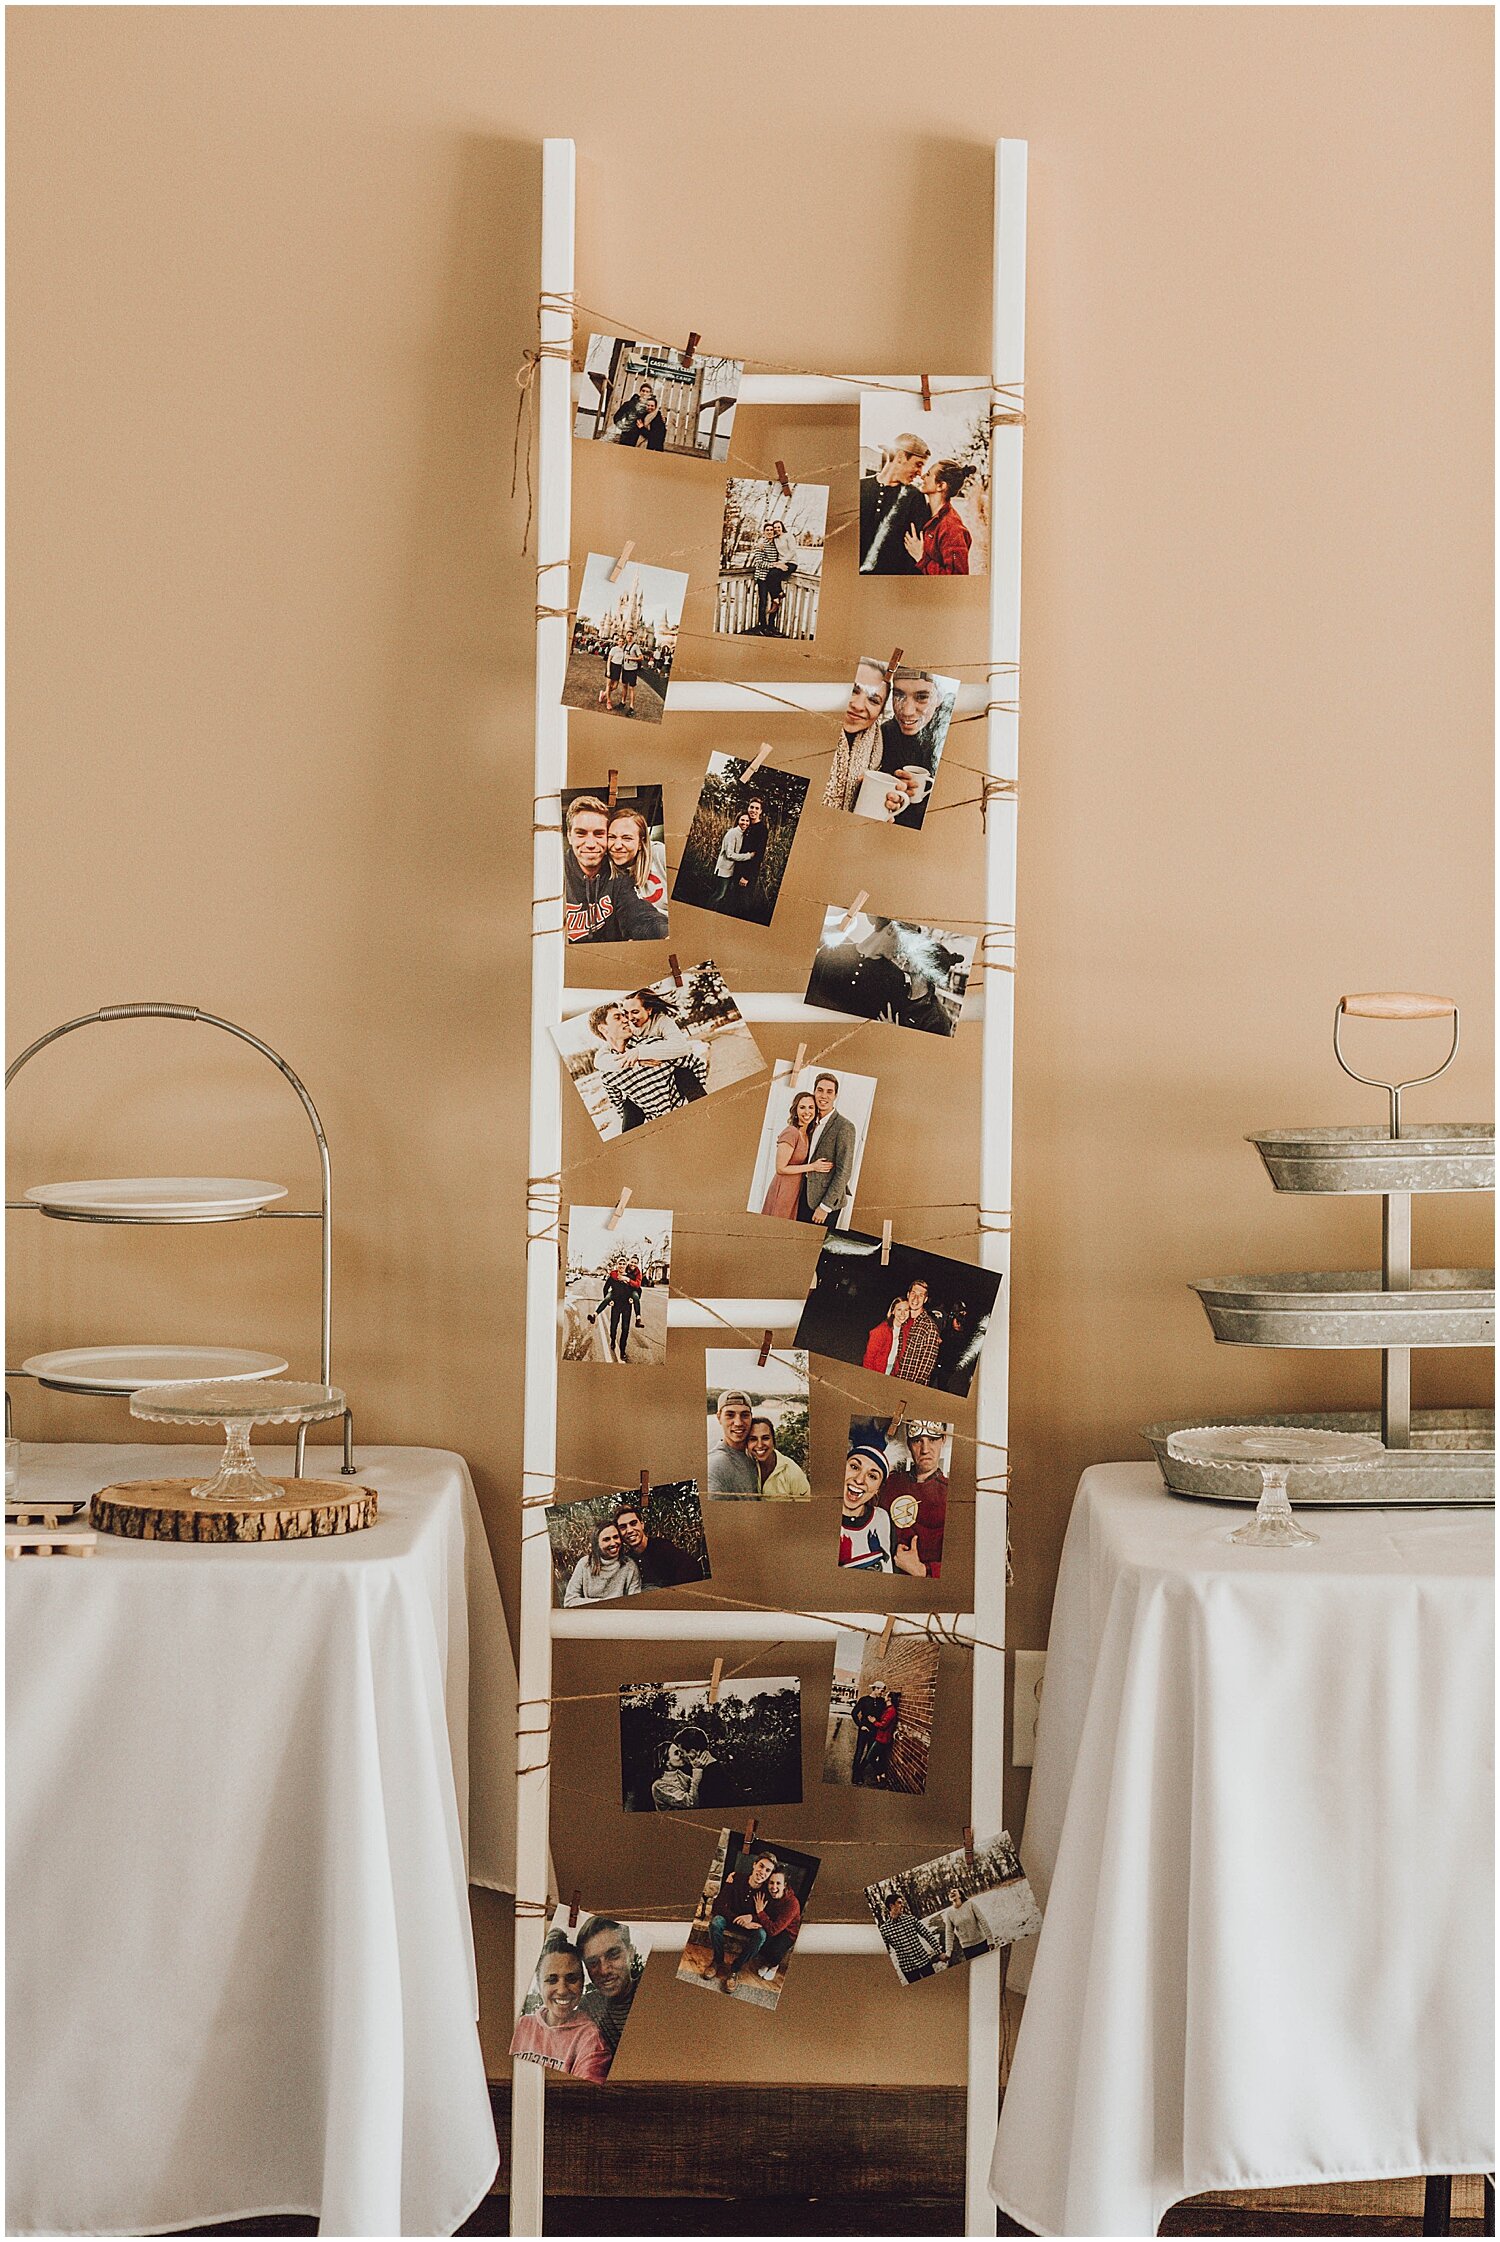  wedding decor with photos of the bride and groom 